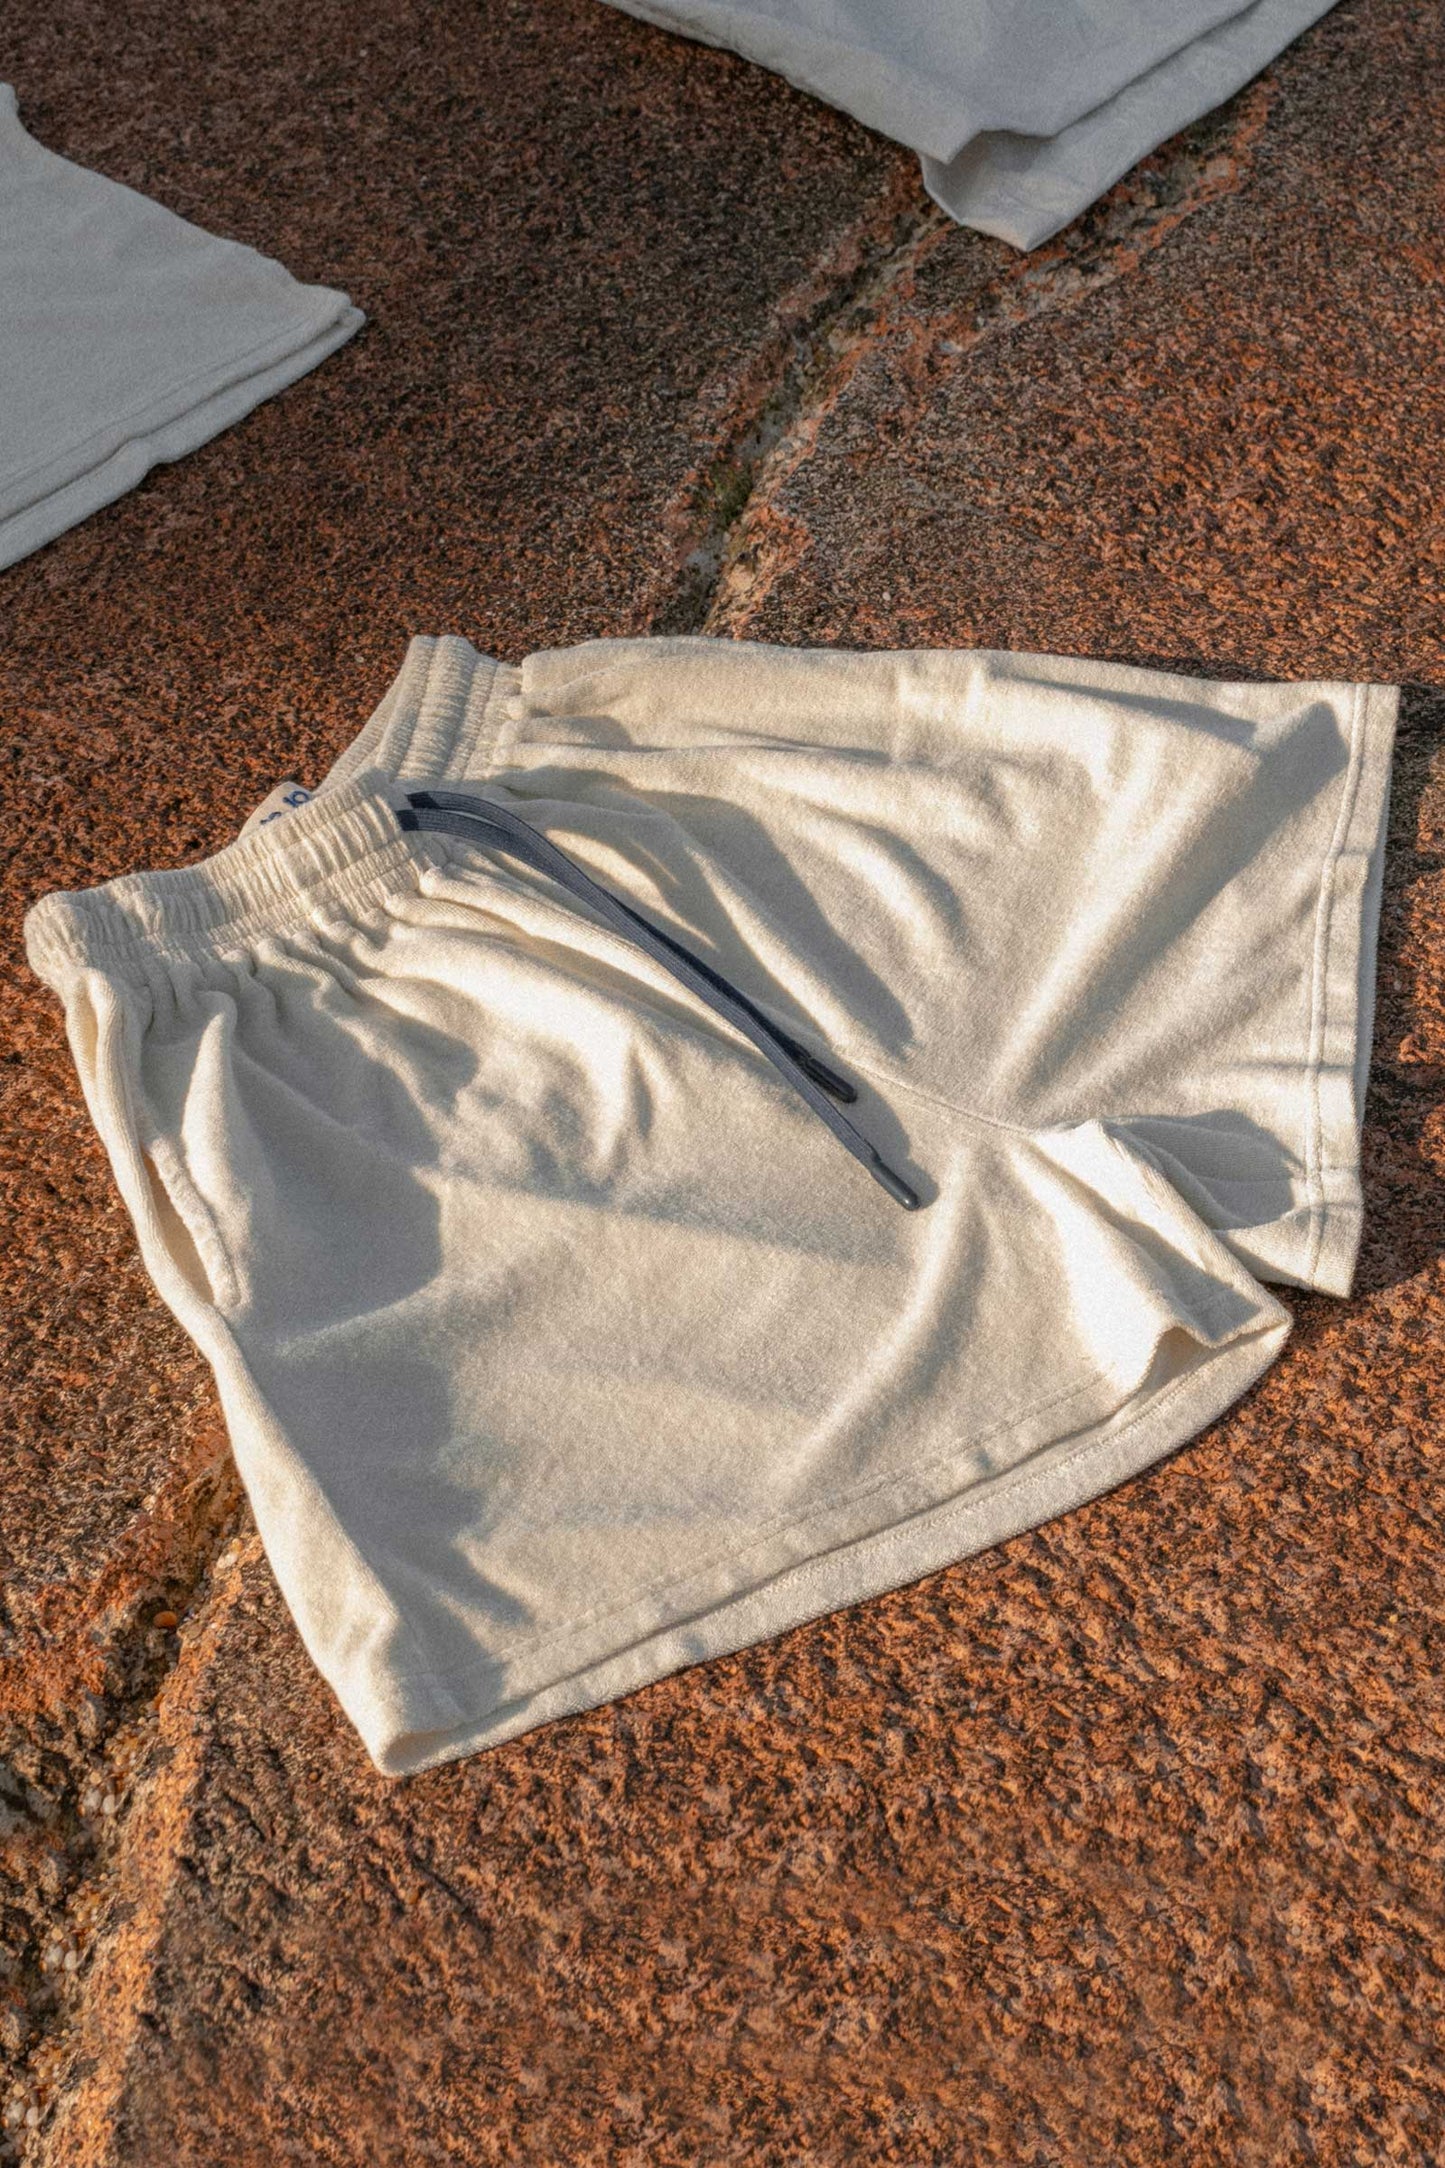 10 to 10 Cotton shorts in beige  colour with blue cord